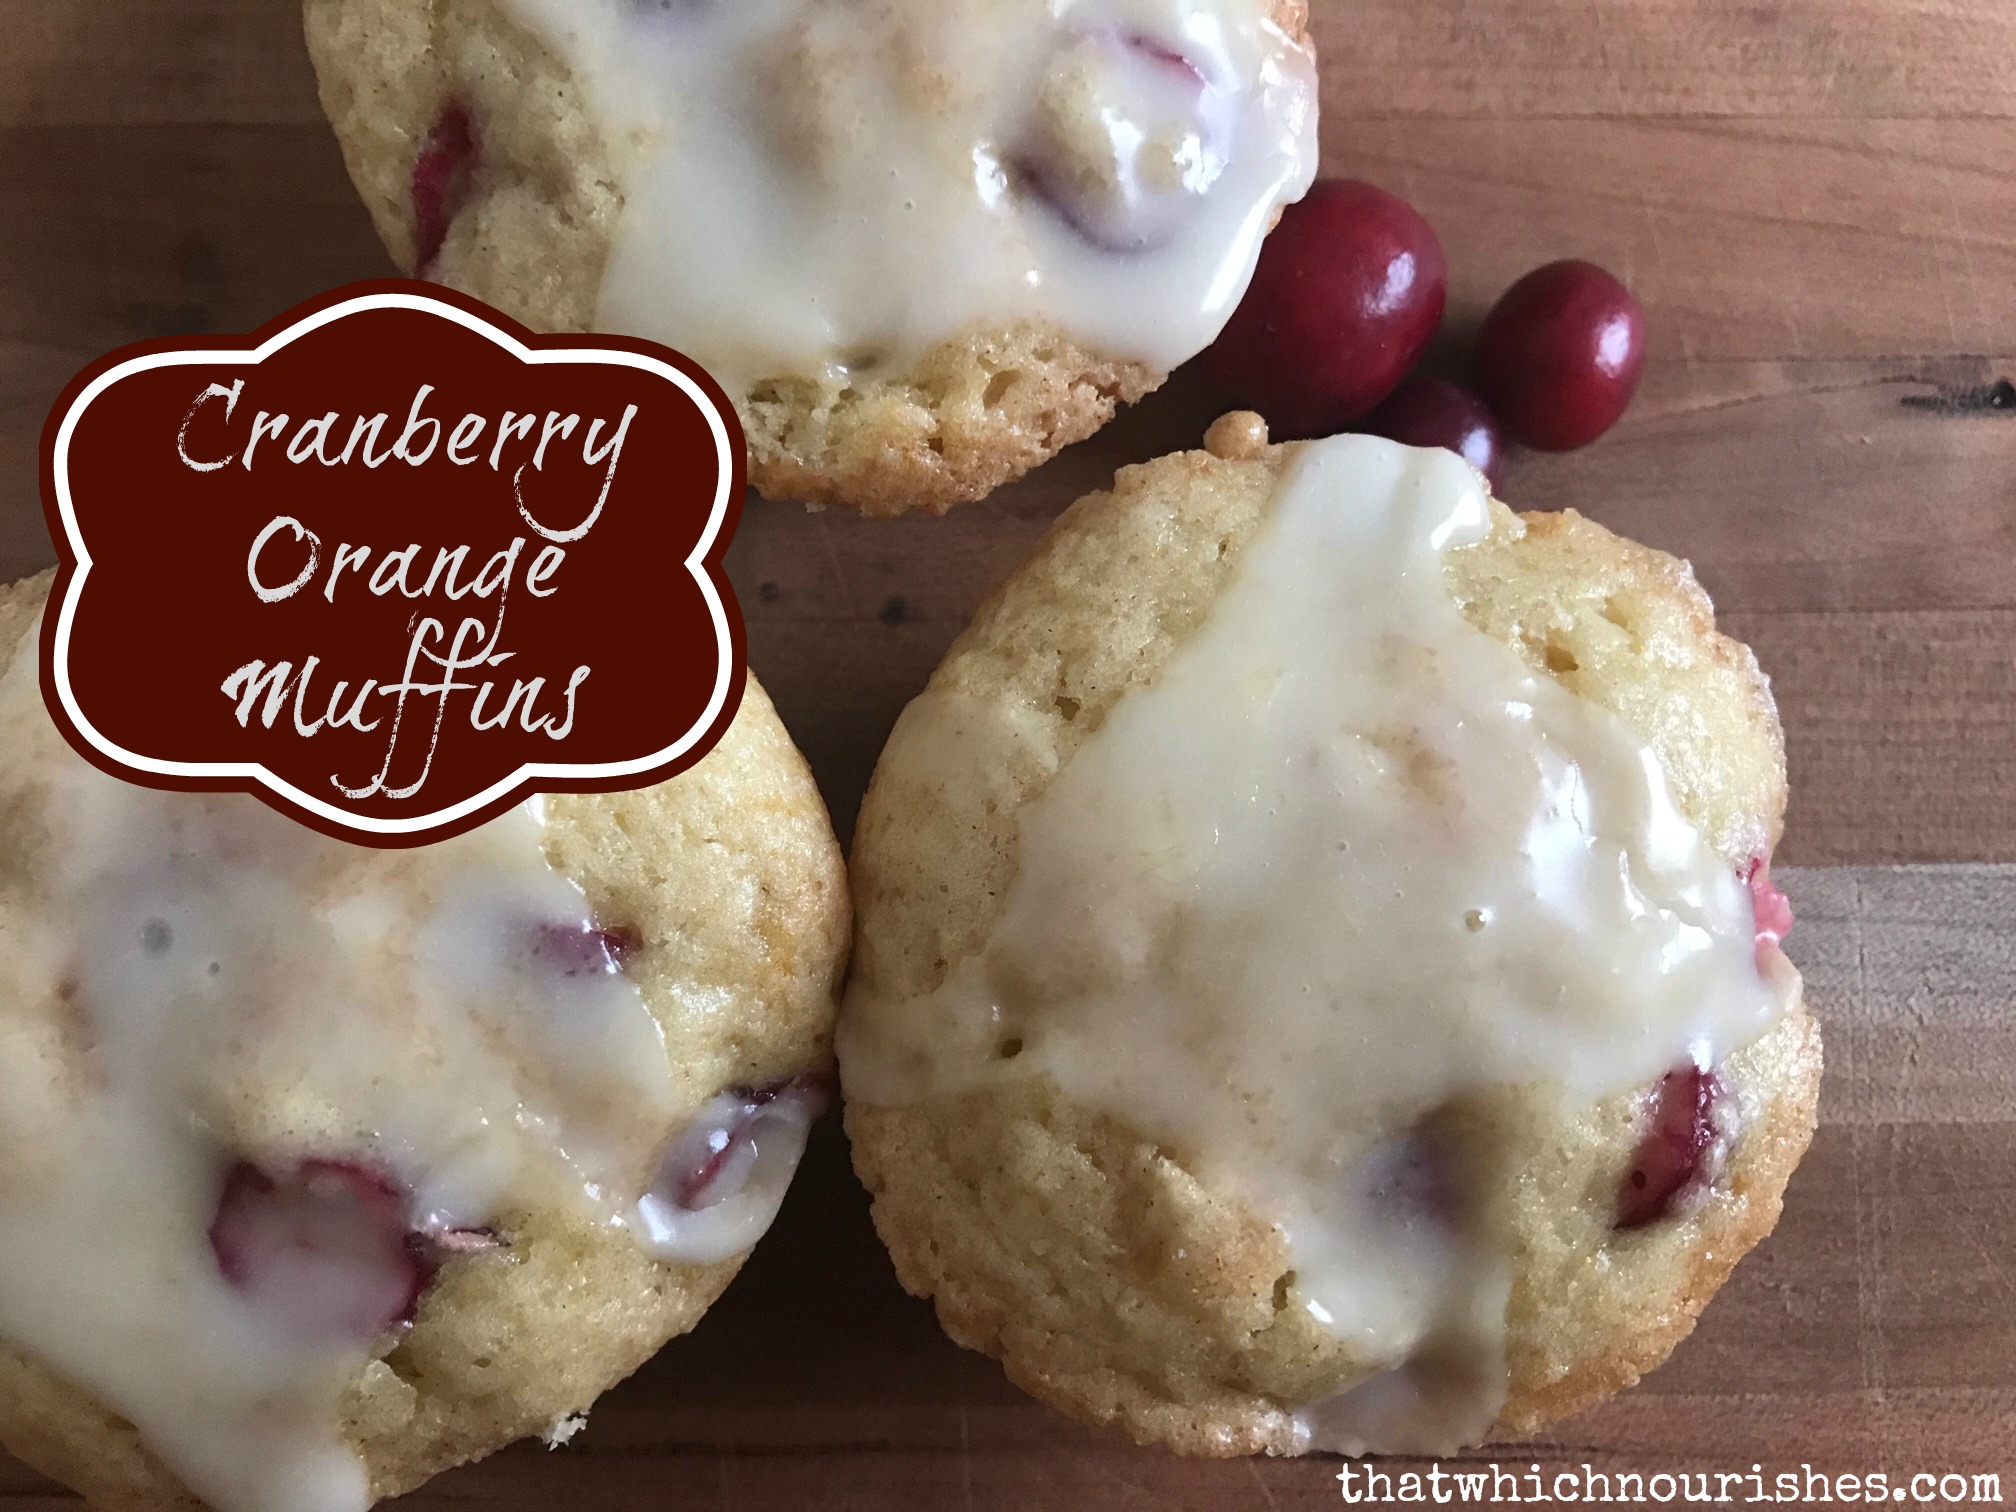 Glazed Cranberry Orange muffins -- A sweet, fluffy, orange-y muffin with little bursts of tart cranberry, covered with a tangy sweet orange glaze. | thatwhichnourishes.com